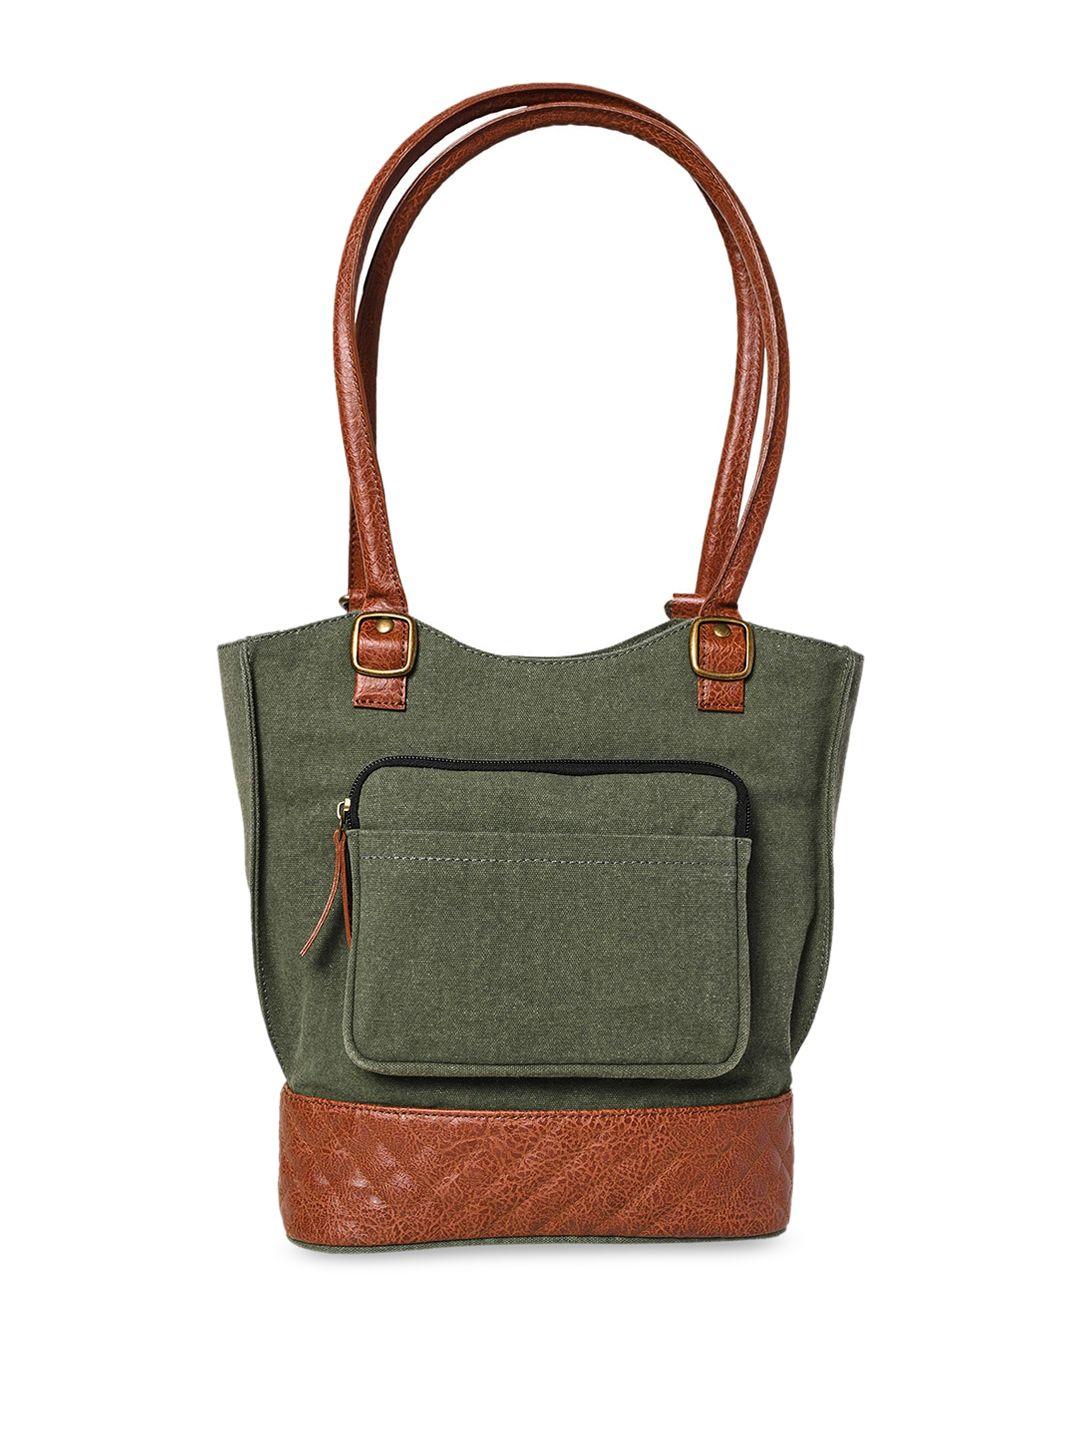 mona b green colourblocked structured shoulder bag with applique